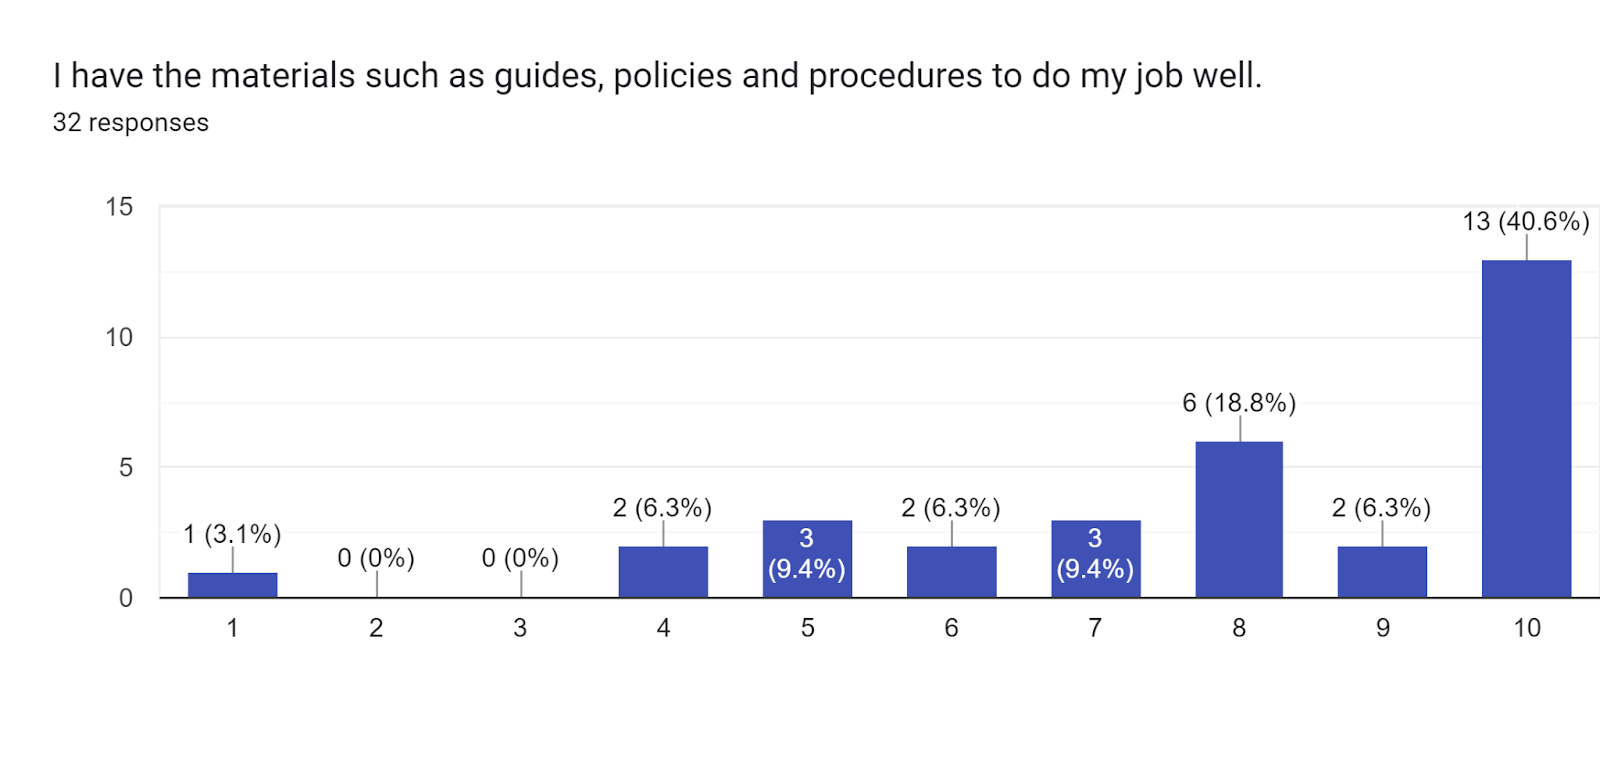 Forms response chart. Question title: I have the materials such as guides, policies and procedures to do my job well.. Number of responses: 32 responses.